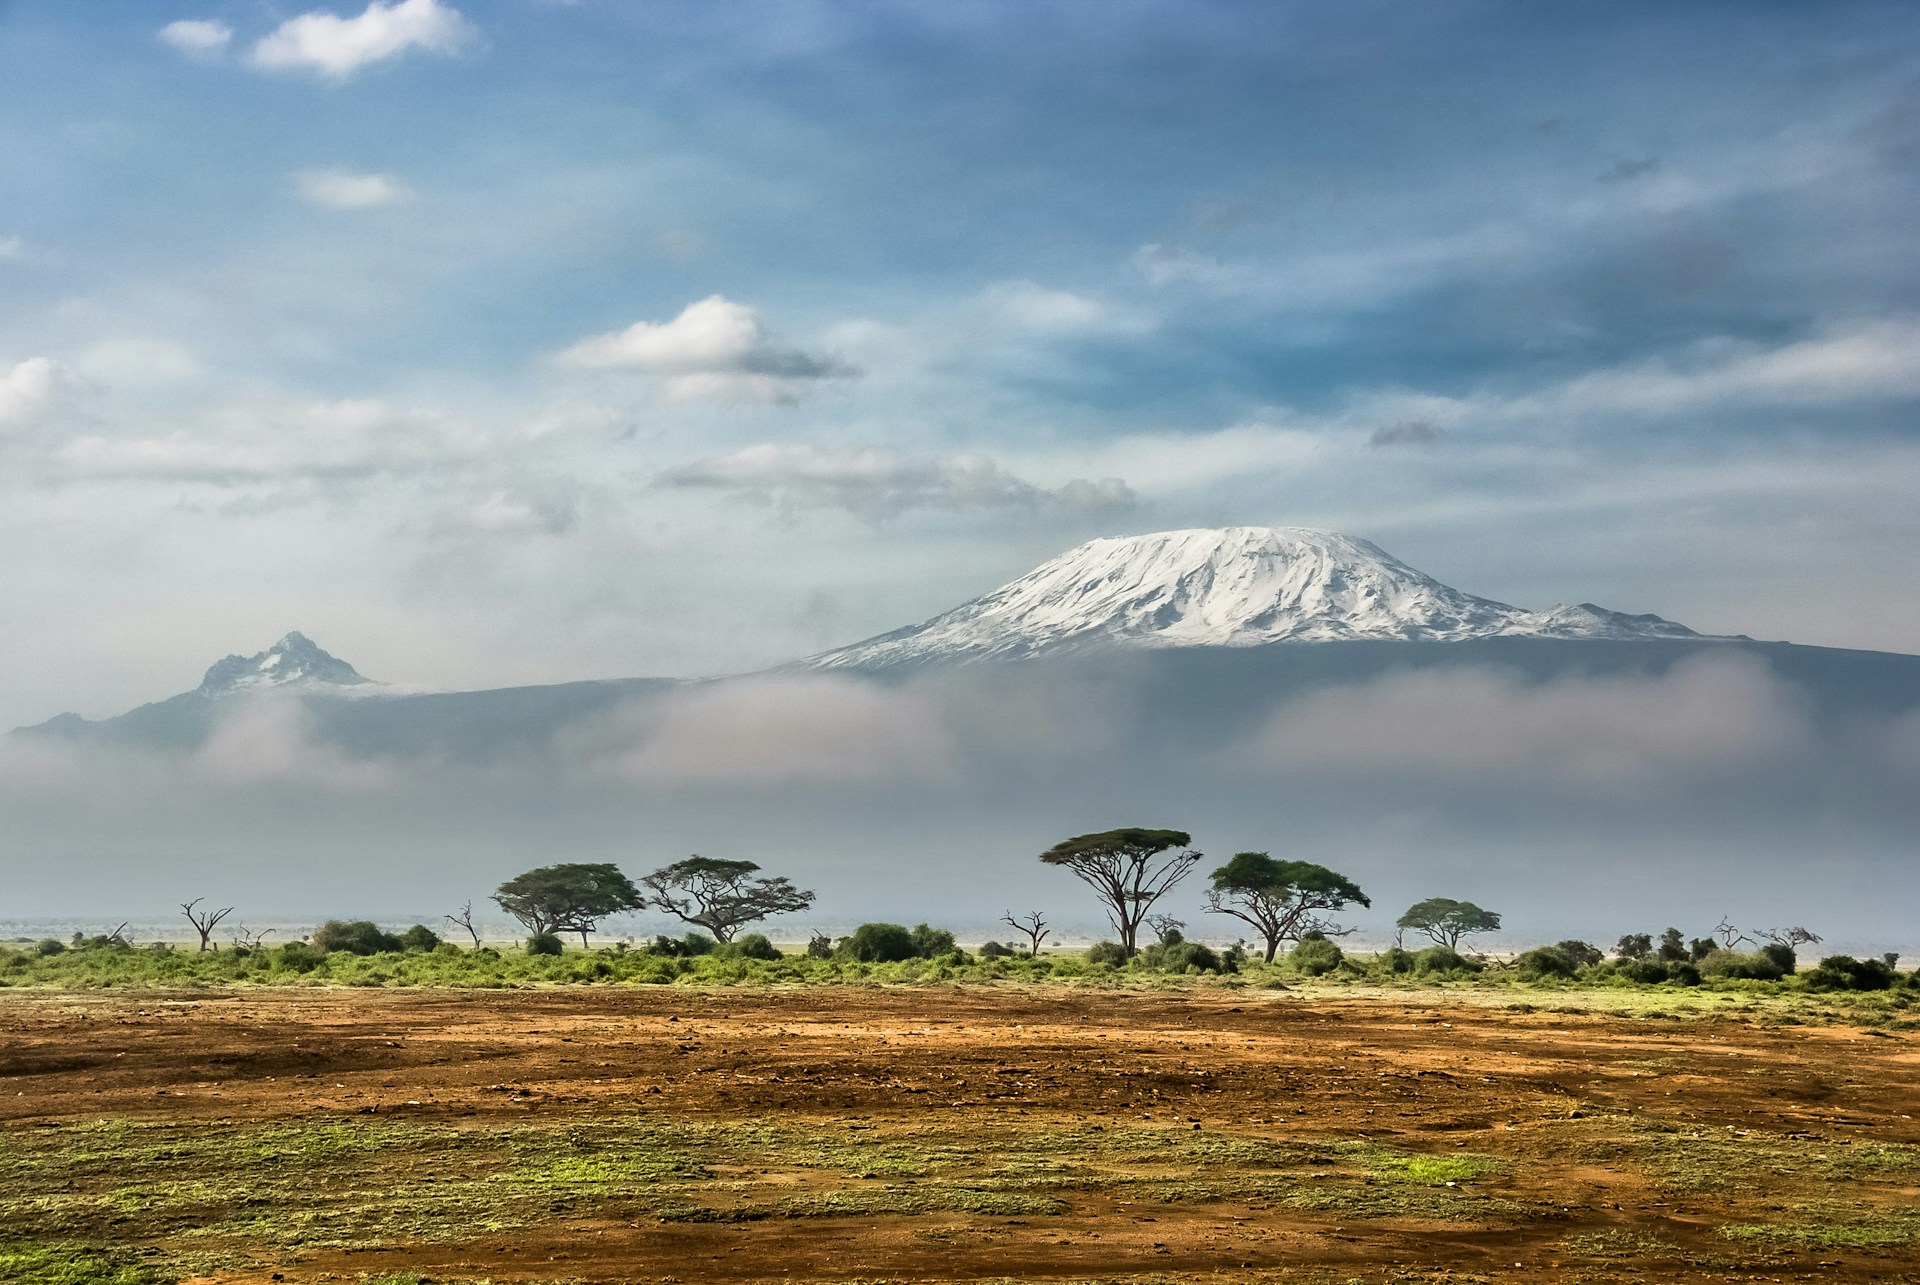 Finding the Best Time to Travel to Africa for Your Interests